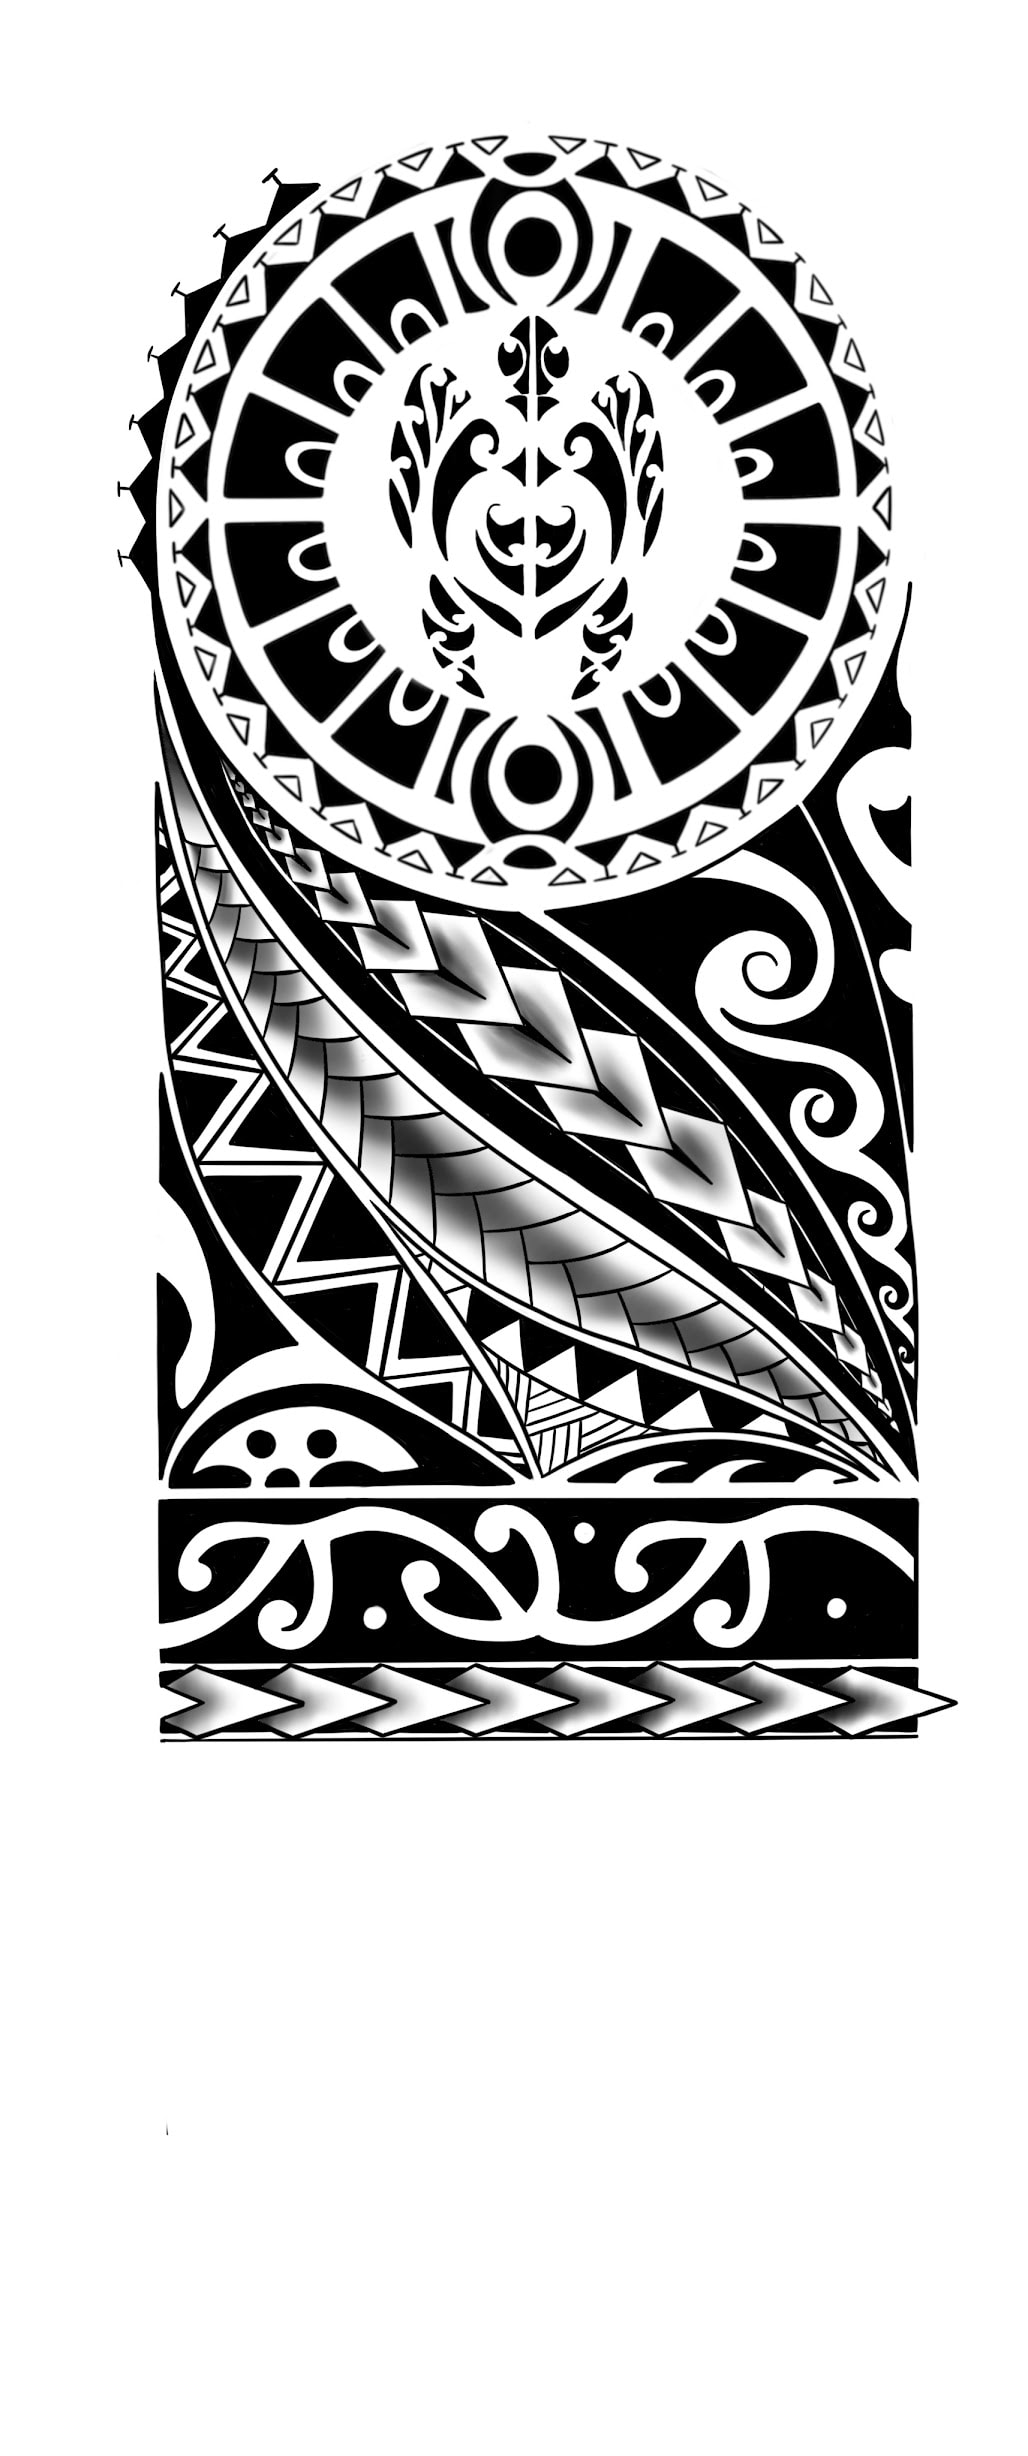 Maori Tribal Style Tattoo Pattern Fit For A Leg Or Arm Hand